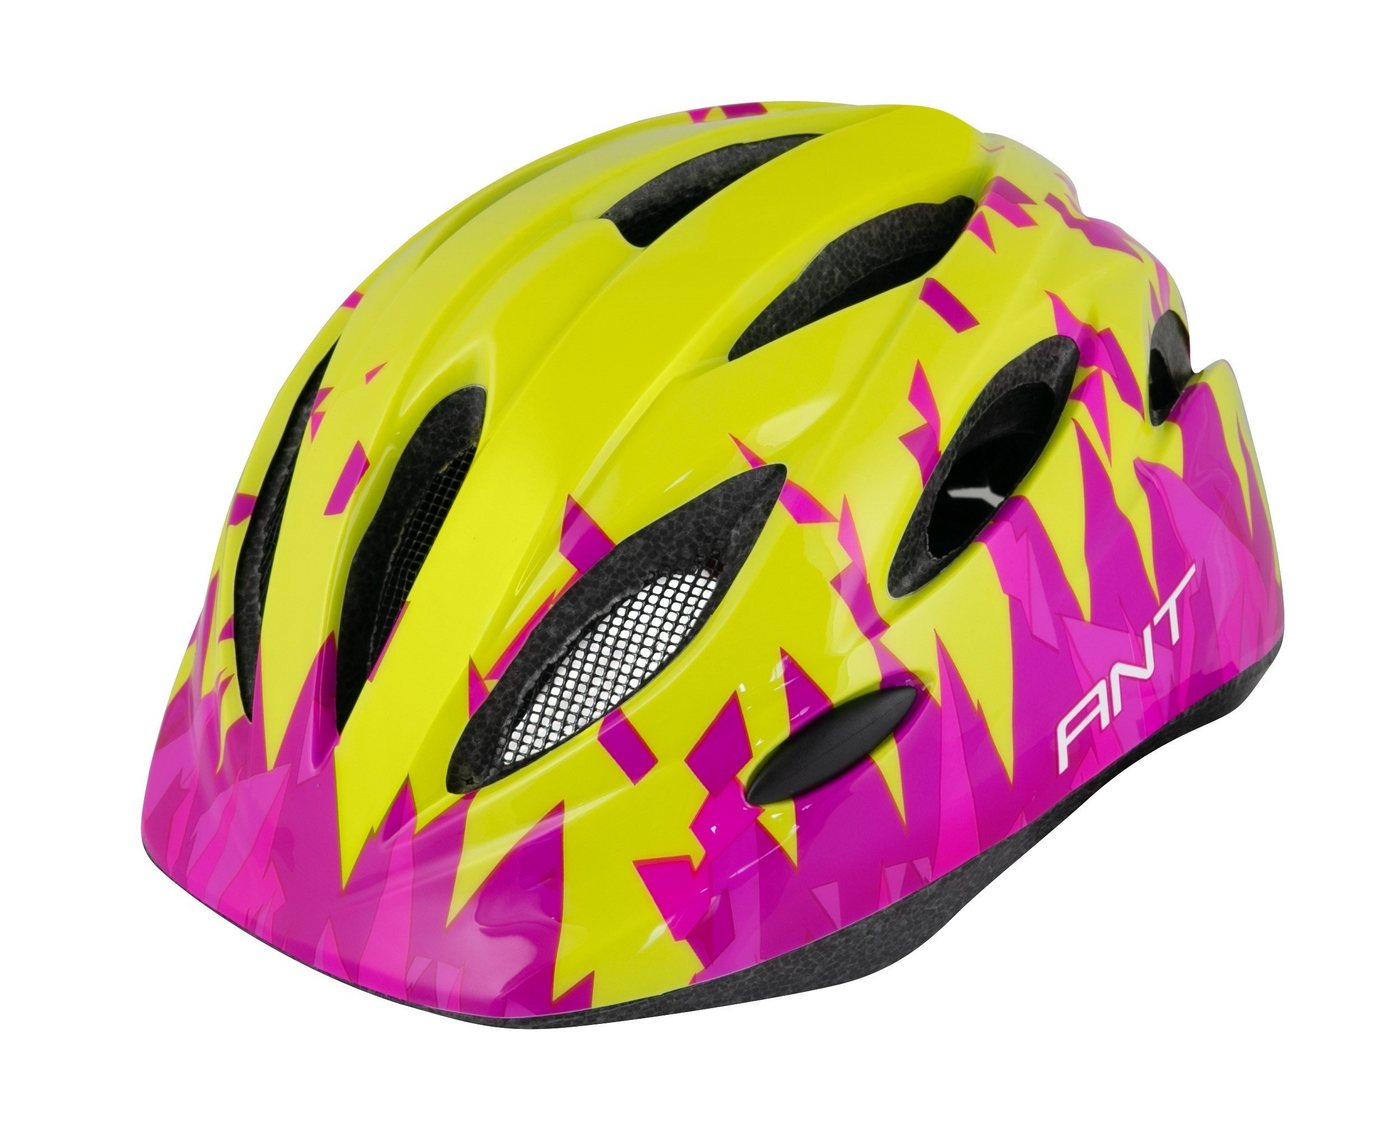 FORCE Fahrradhelm Helm-Junior FORCE ANT fluo-pink S-M von FORCE